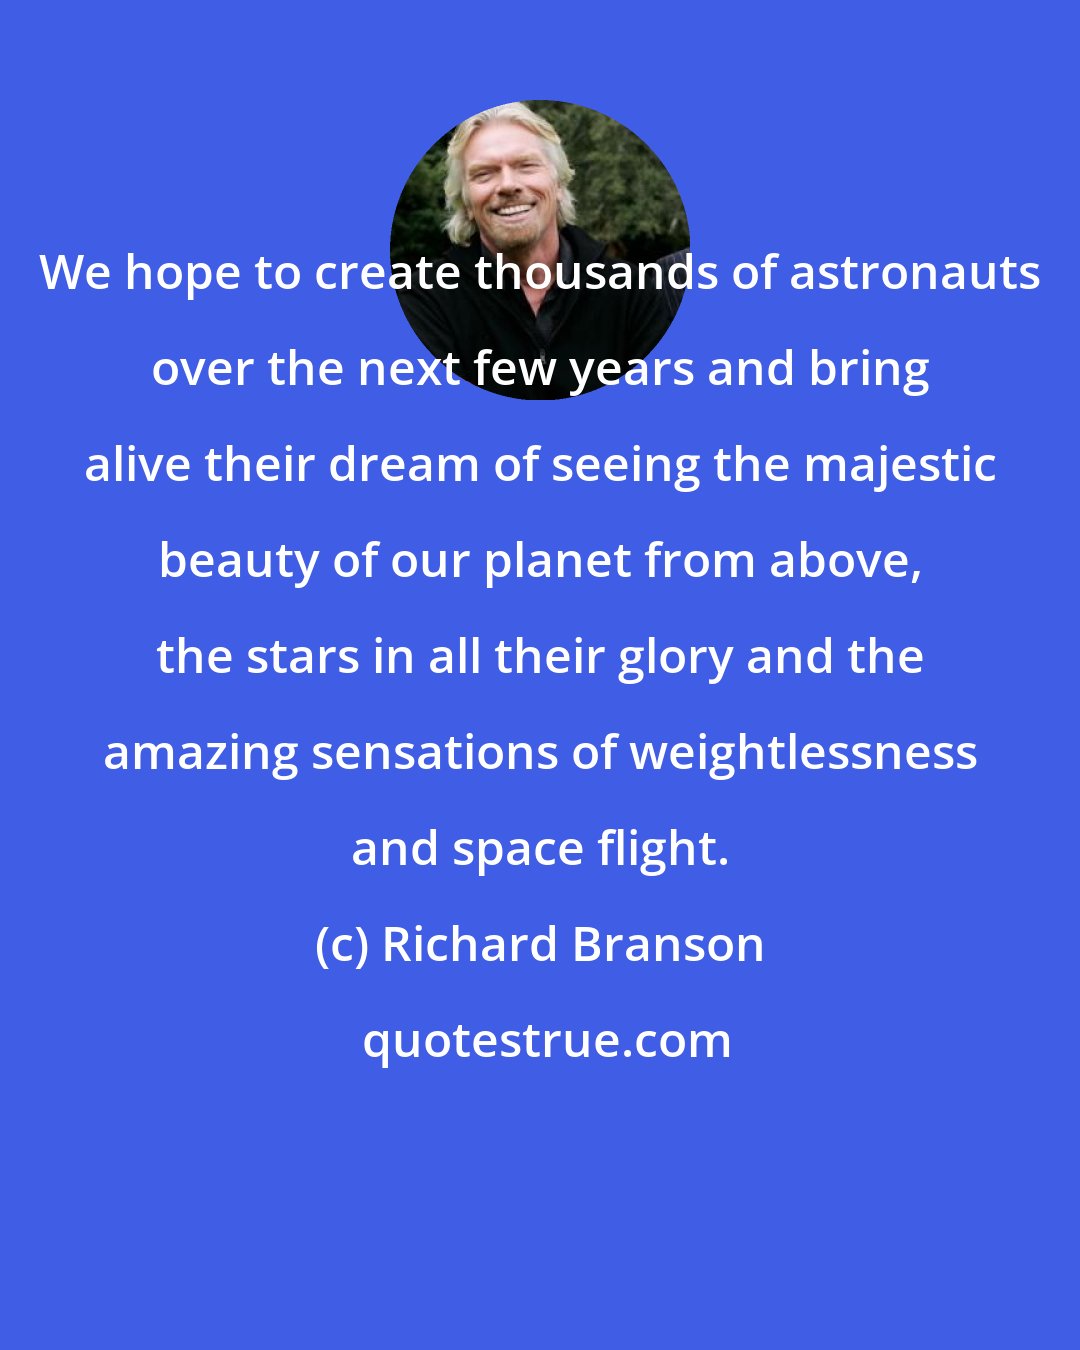 Richard Branson: We hope to create thousands of astronauts over the next few years and bring alive their dream of seeing the majestic beauty of our planet from above, the stars in all their glory and the amazing sensations of weightlessness and space flight.